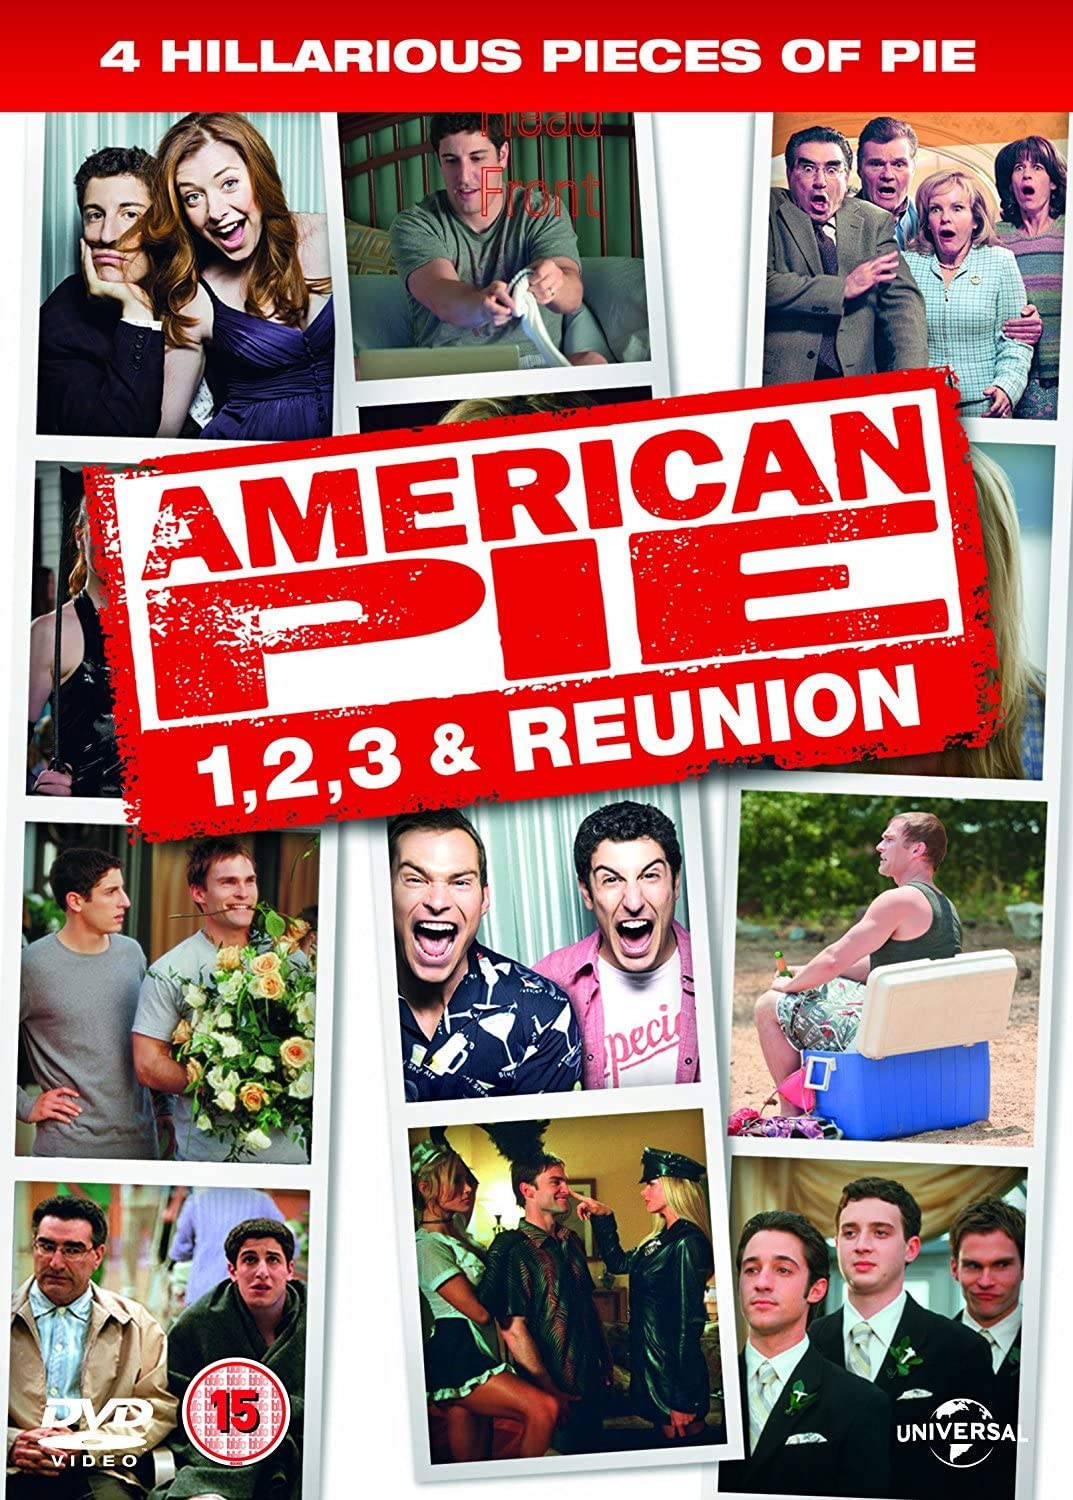 American Pie: 4 Film Collection (DVD)